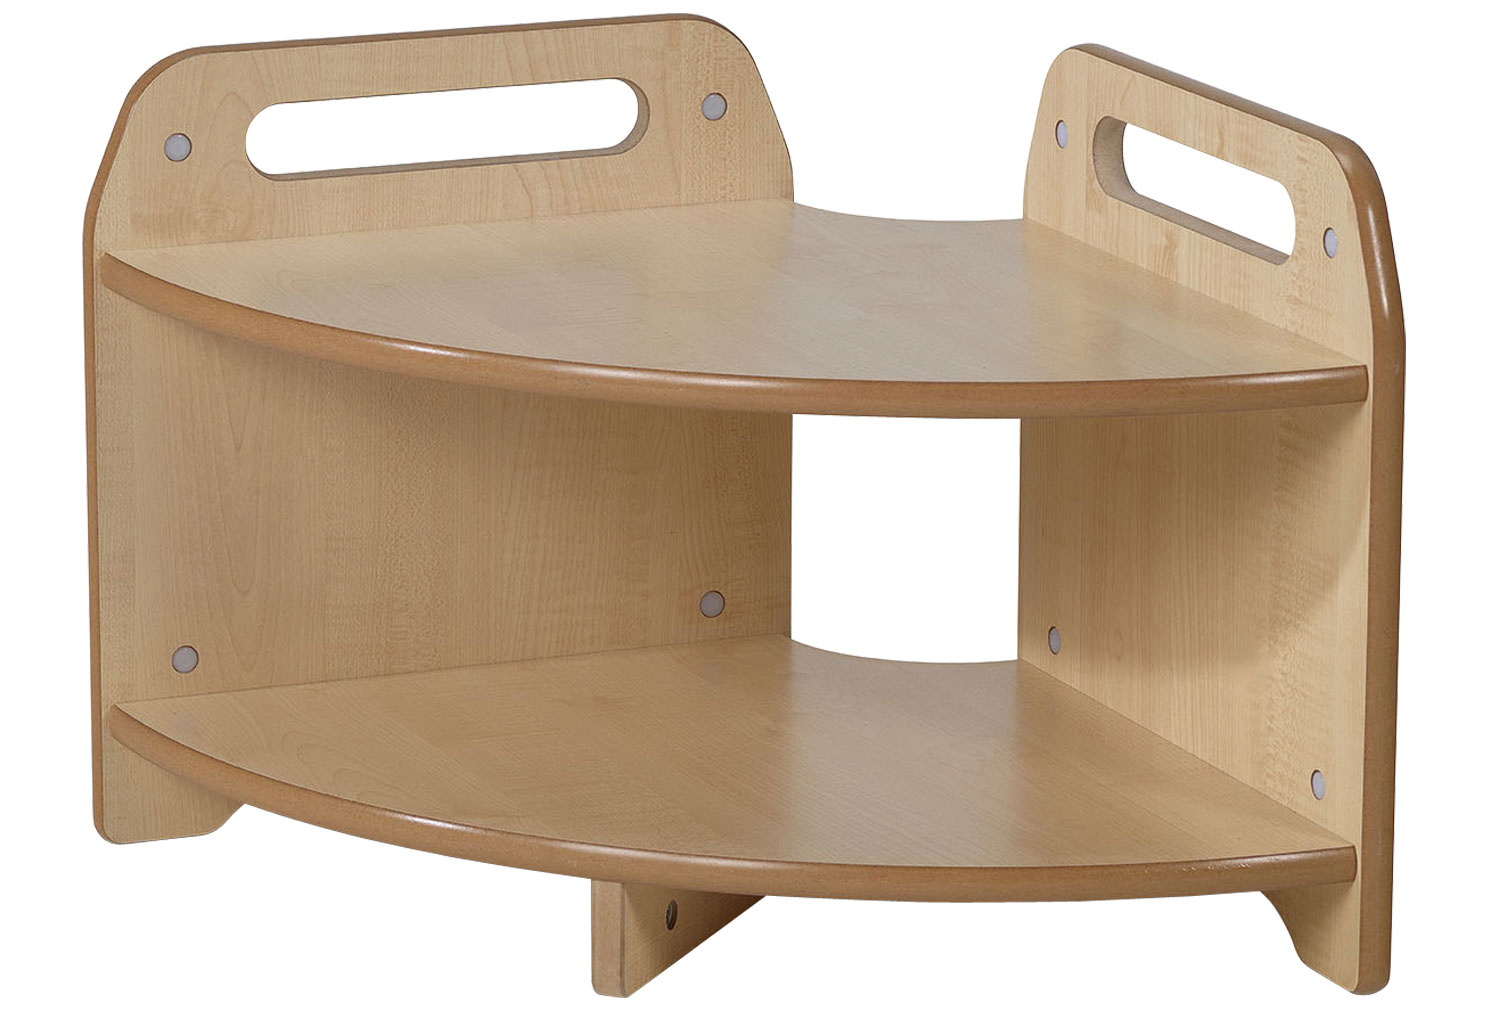 Early Years Low Level 90 Degree Corner Unit, Maple